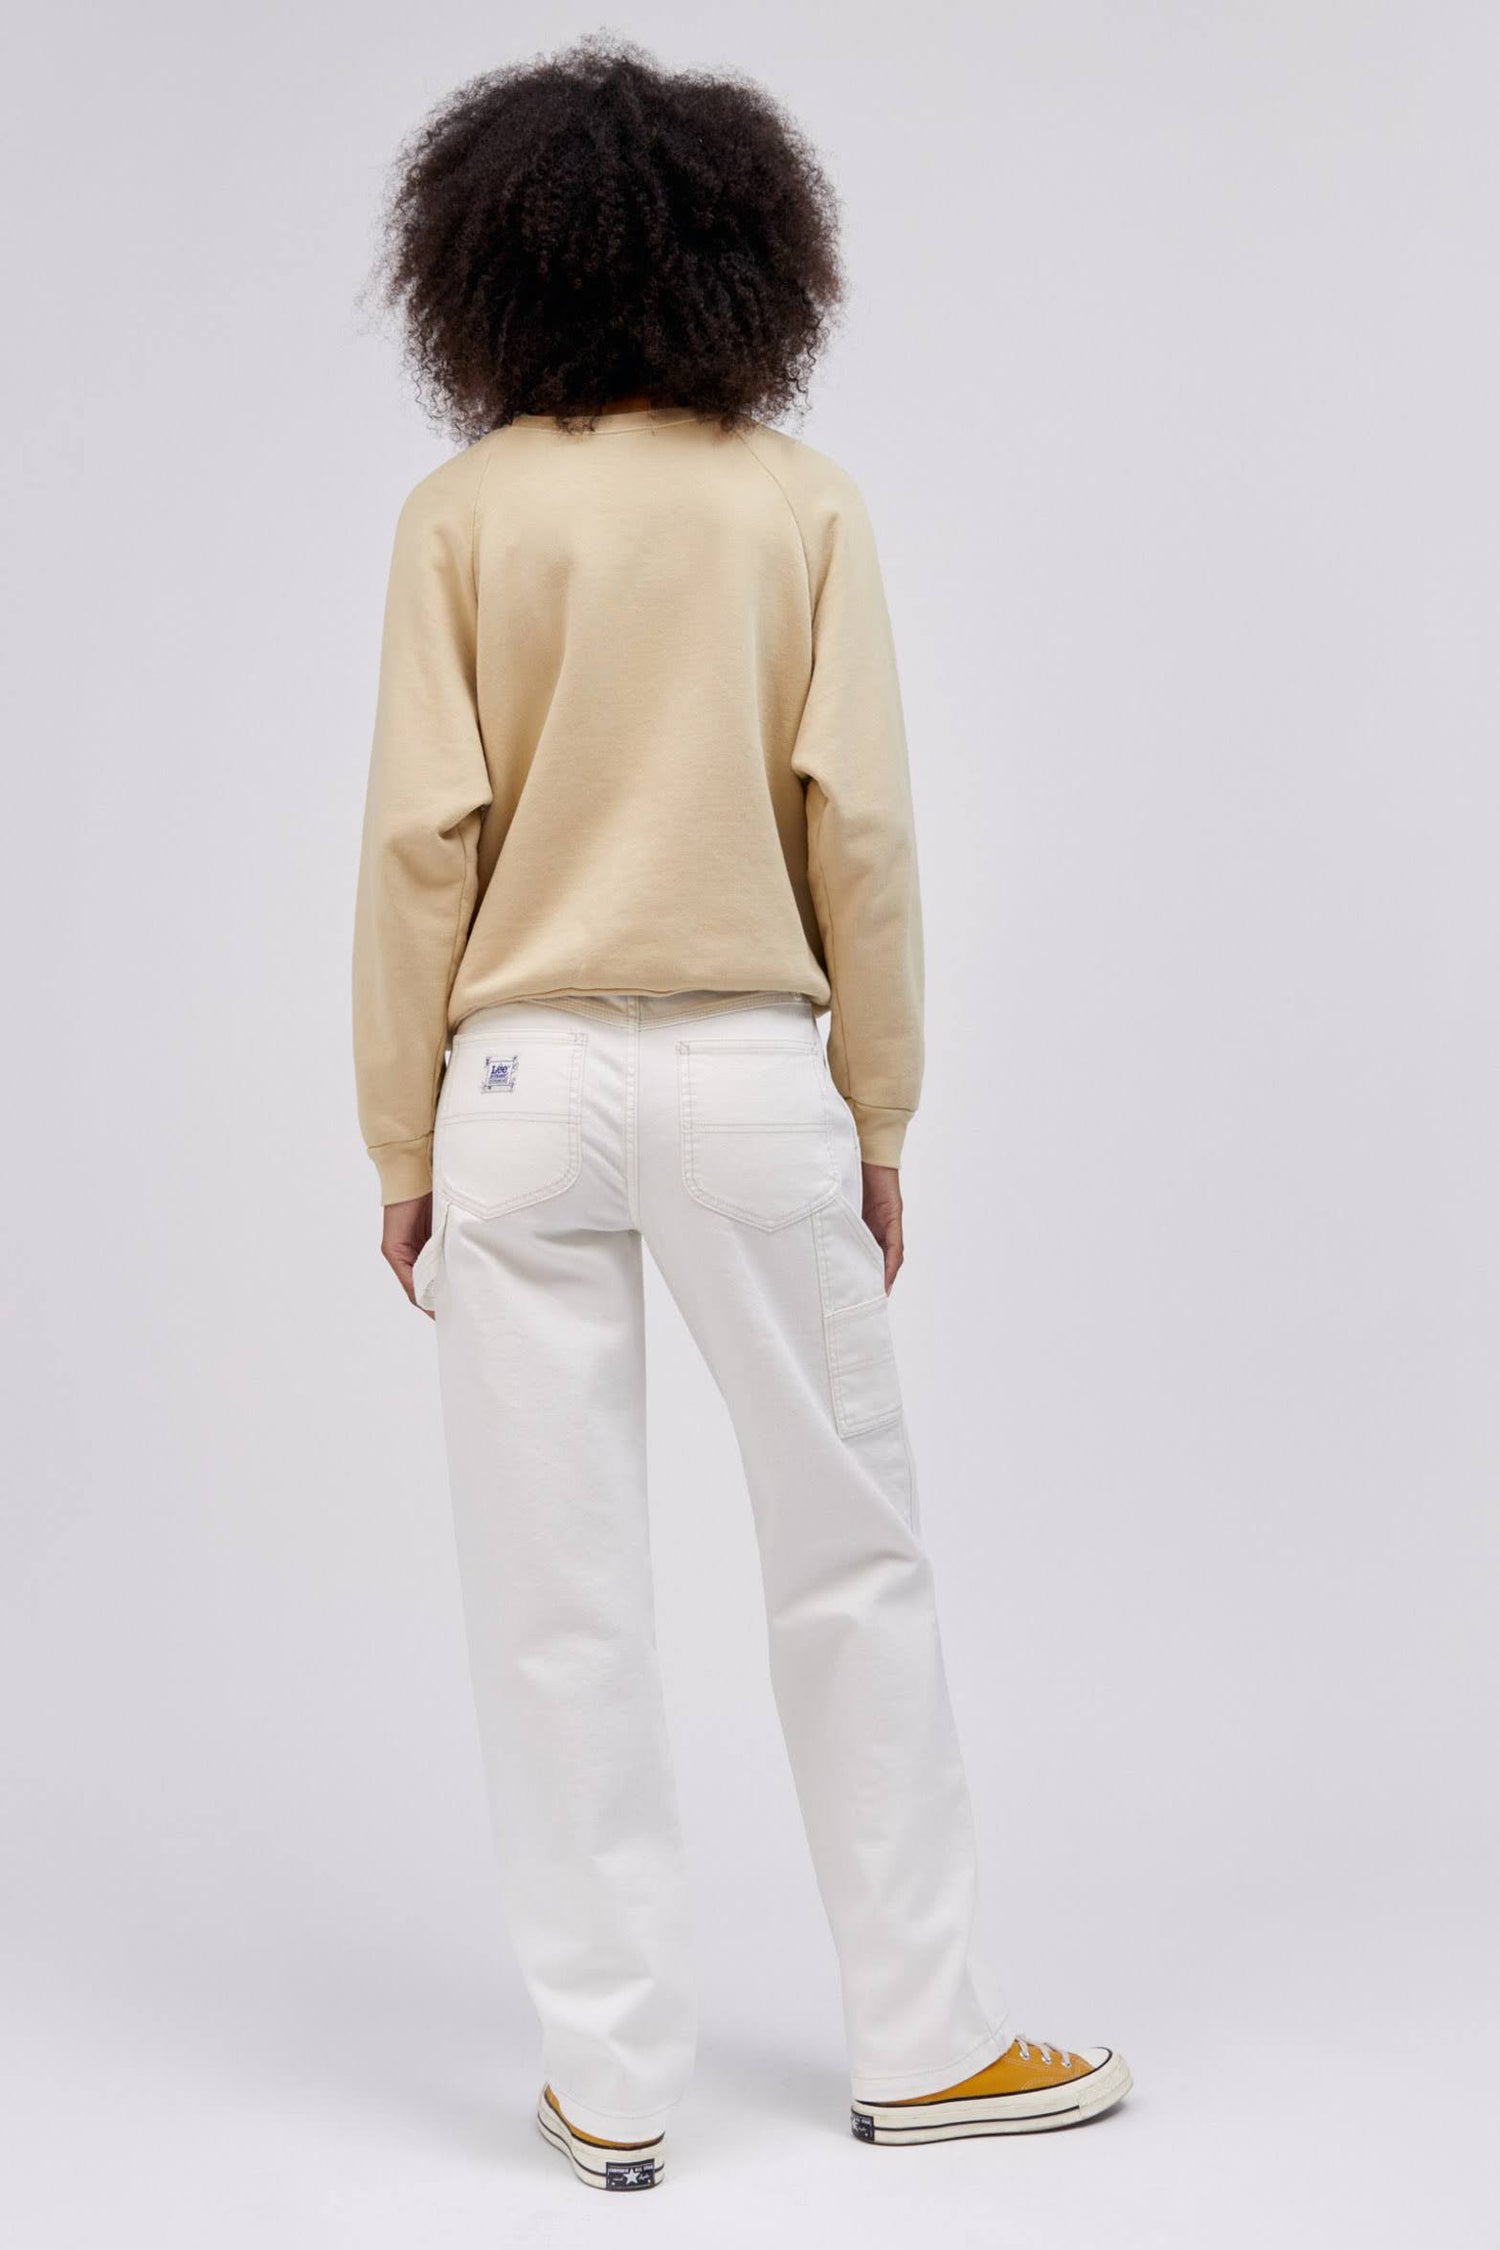 backside of curly haired model in a standing pose wearing a khaki colored sweatshirt and white workwear pants